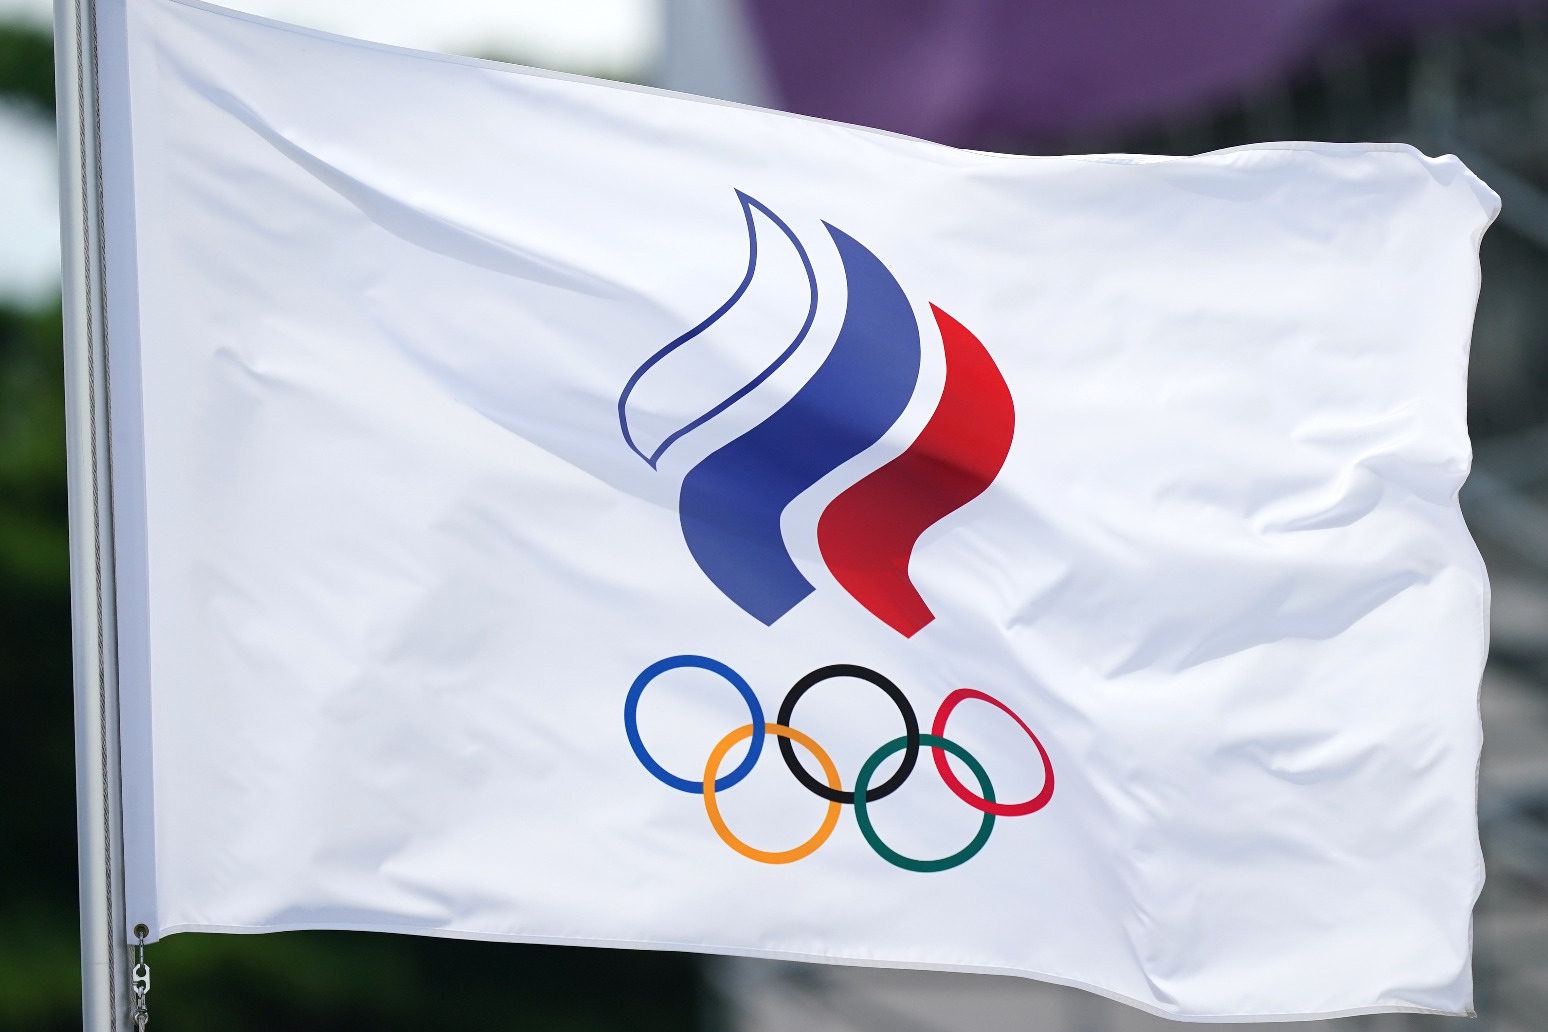 Sports ministers to discuss IOC plans to allow Russian athletes at 2024 Olympics 